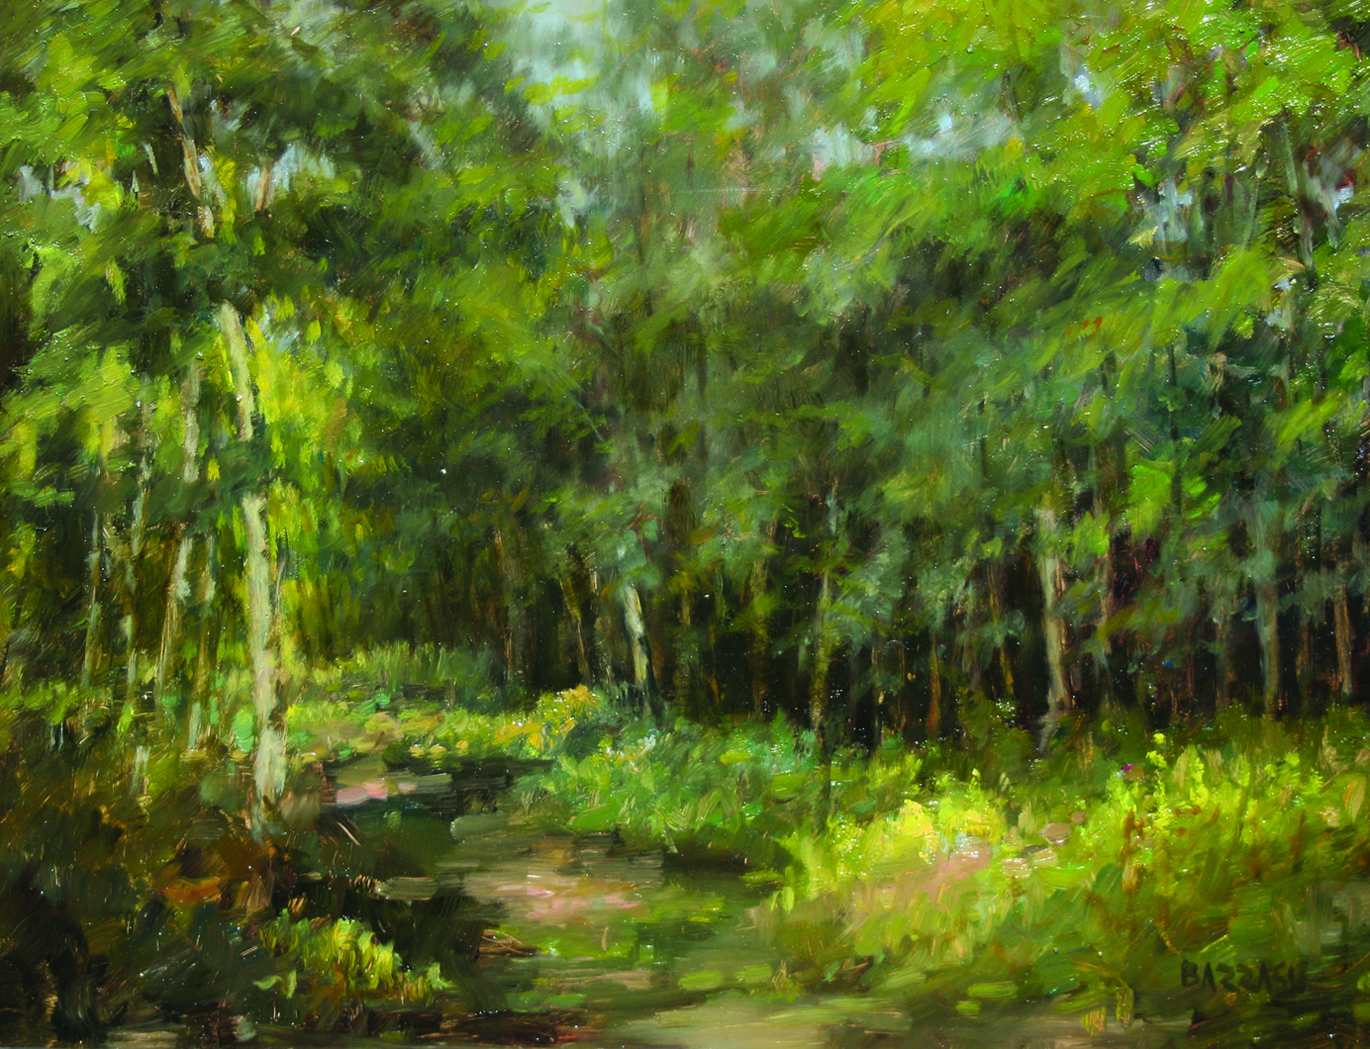 Oil painting of a forest